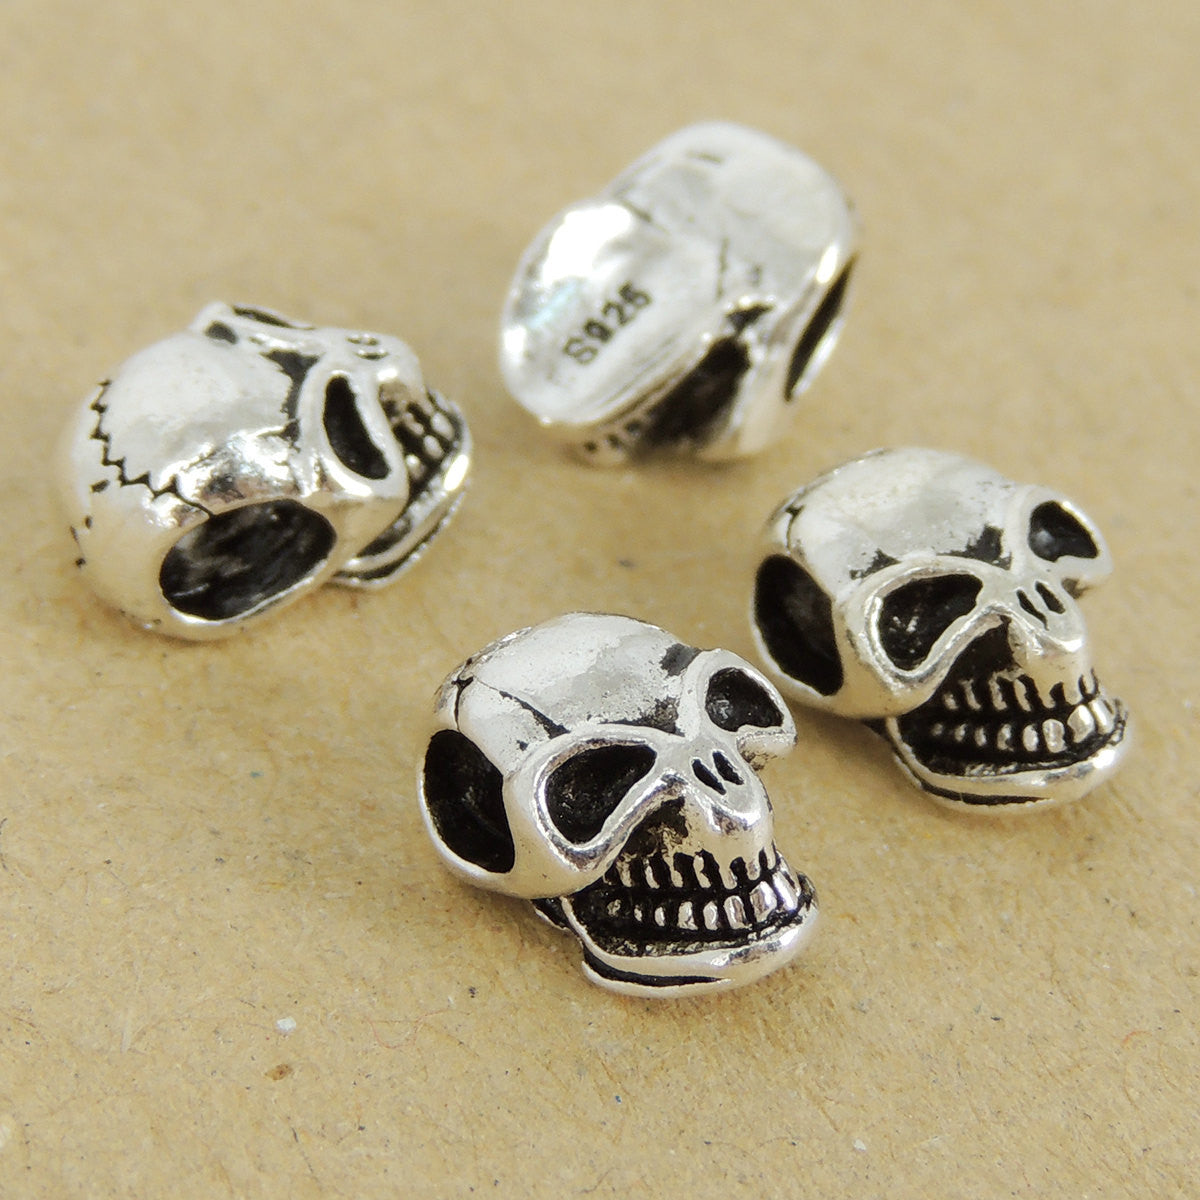 4 PCS Smiling Skull Beads - S925 Sterling Silver - Wholesale by Gem & Silver WSP431X4